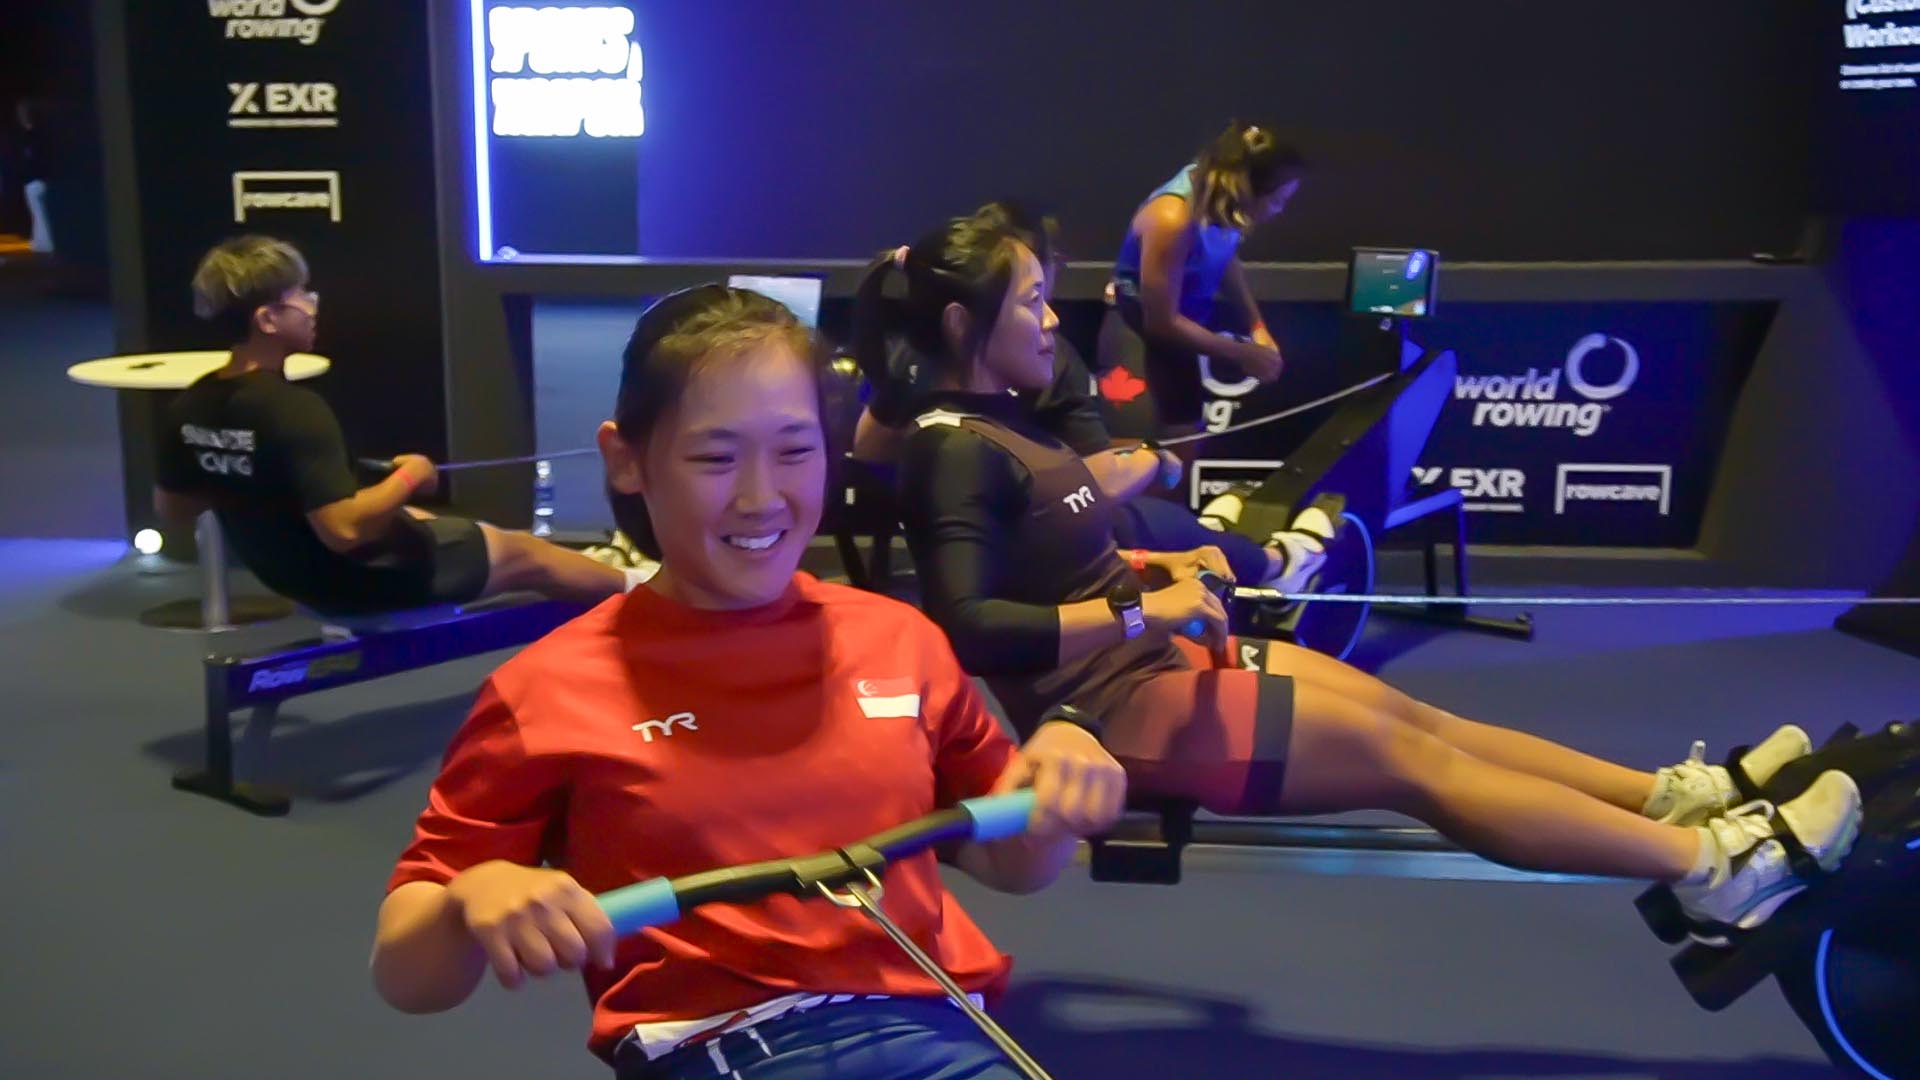 Young people rowing indoor